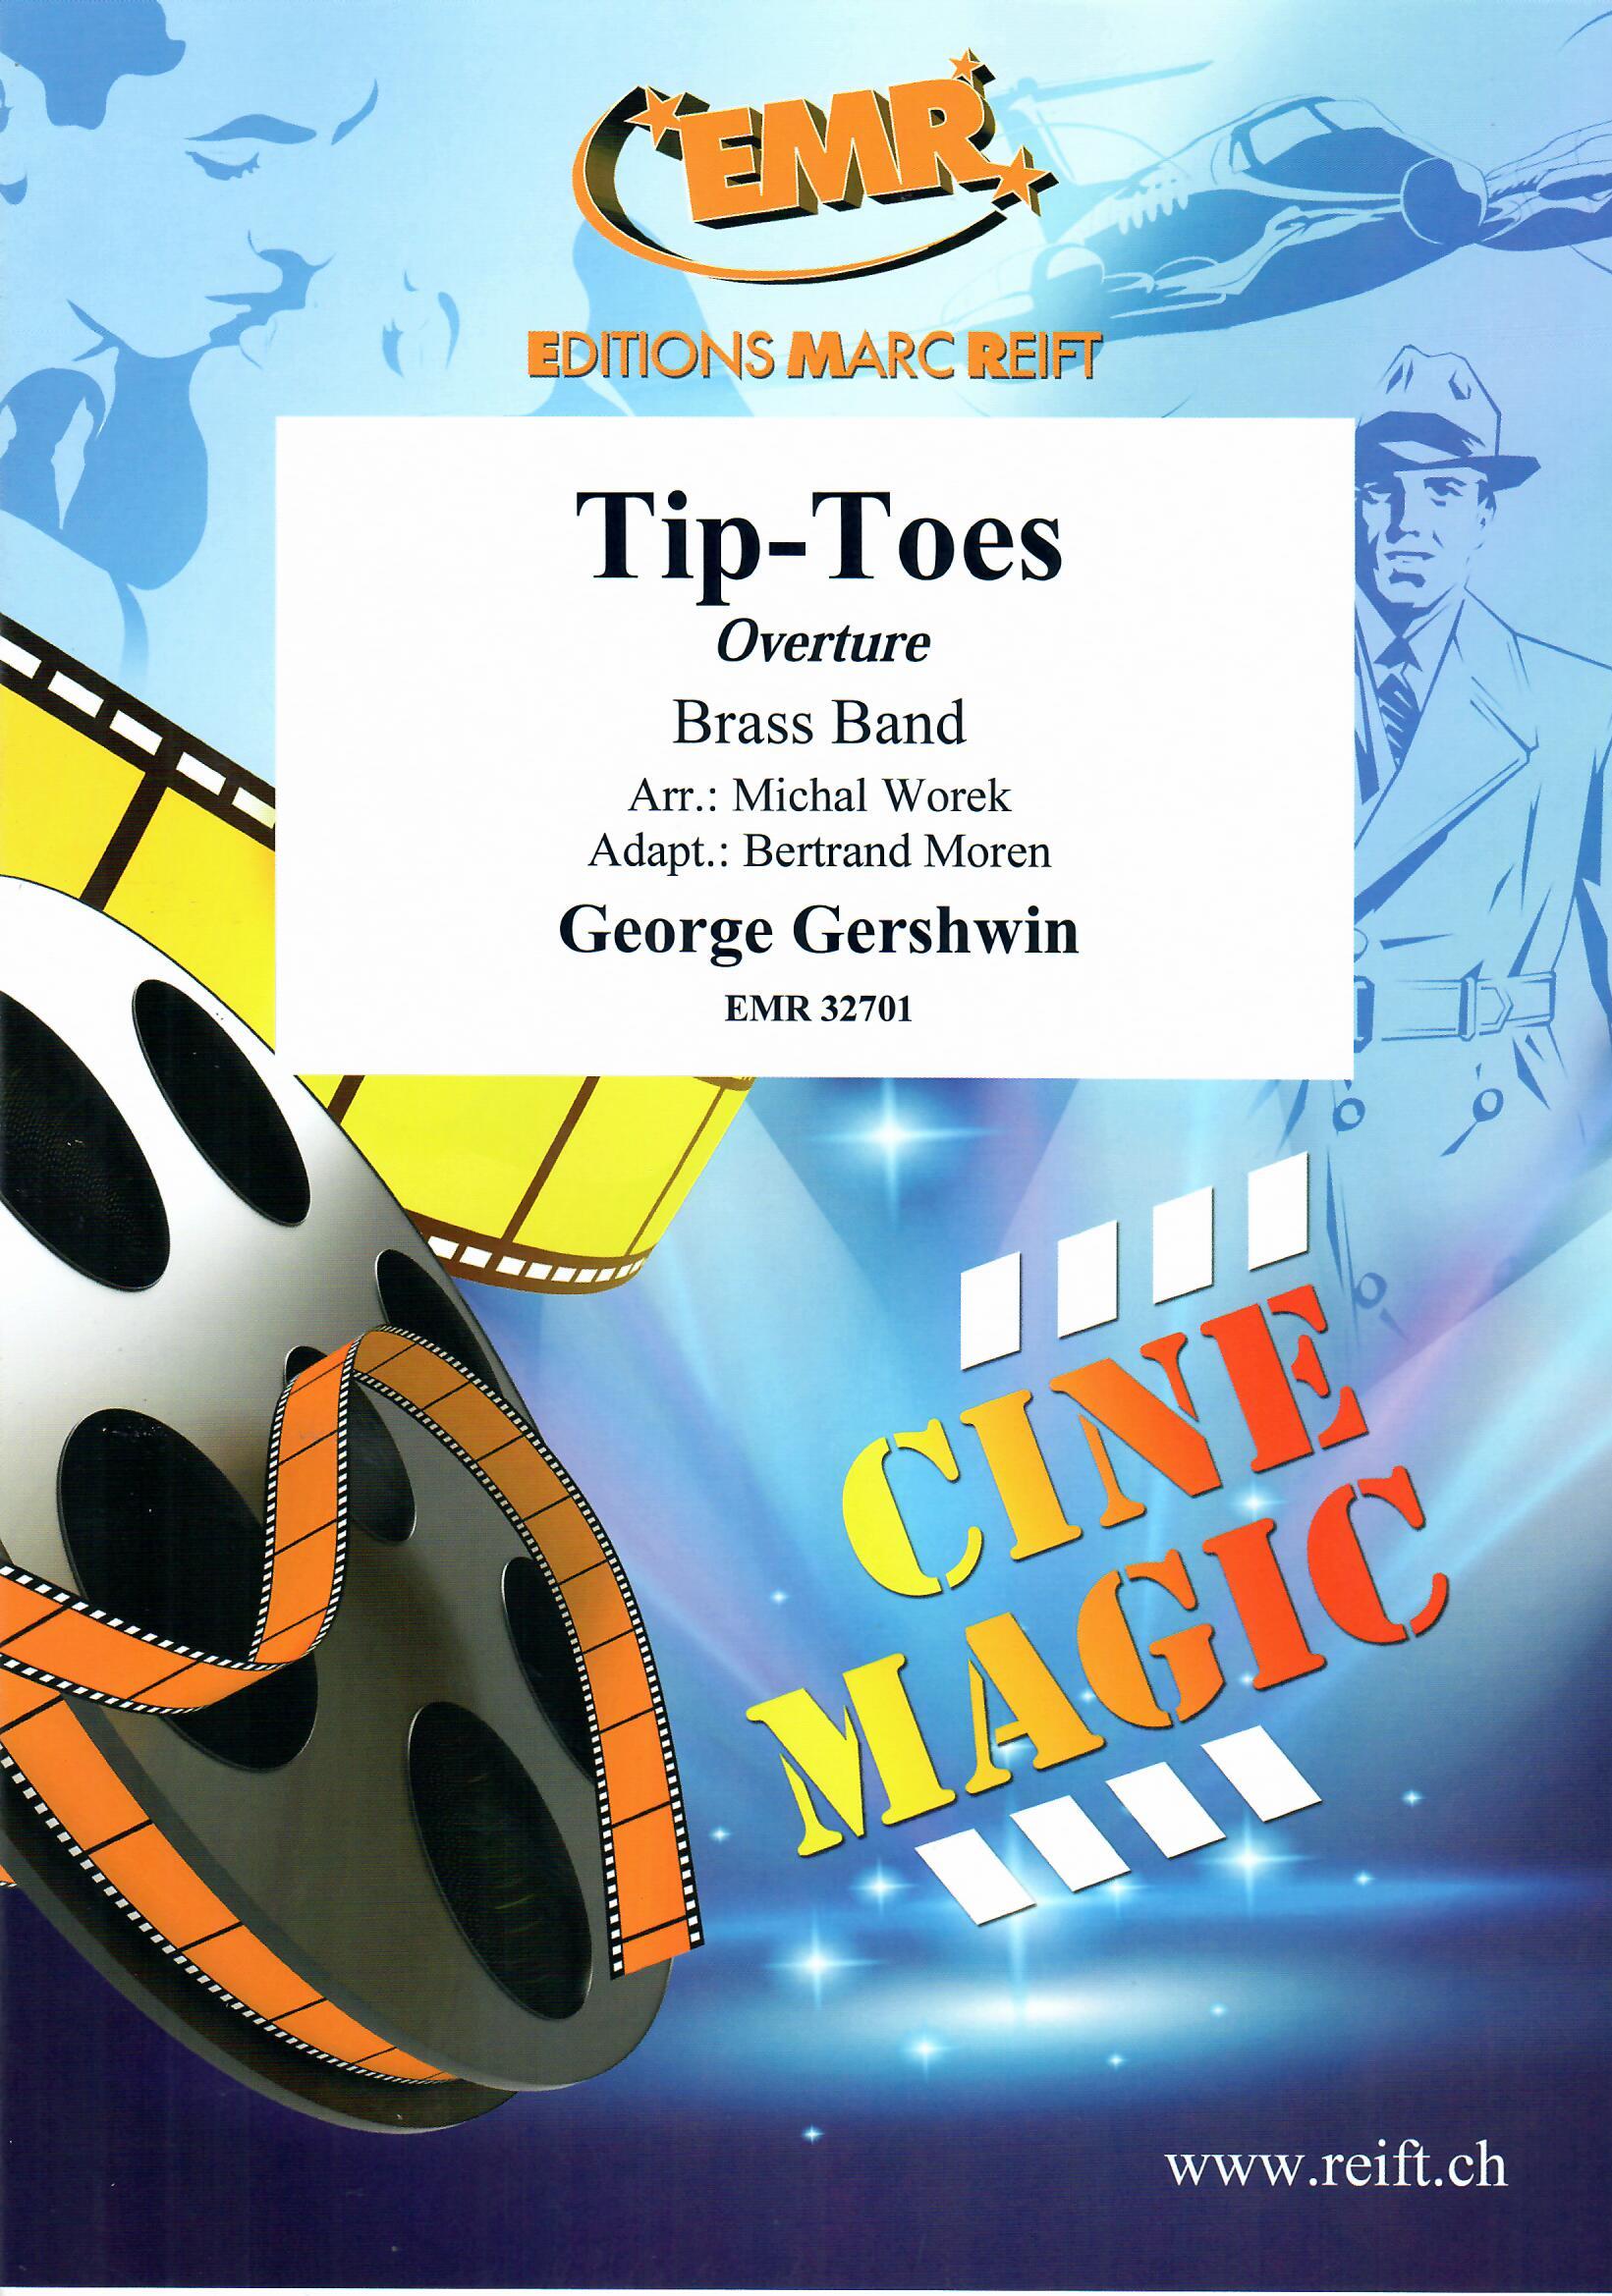 TIP-TOES, NEW & RECENT Publications, LIGHT CONCERT MUSIC